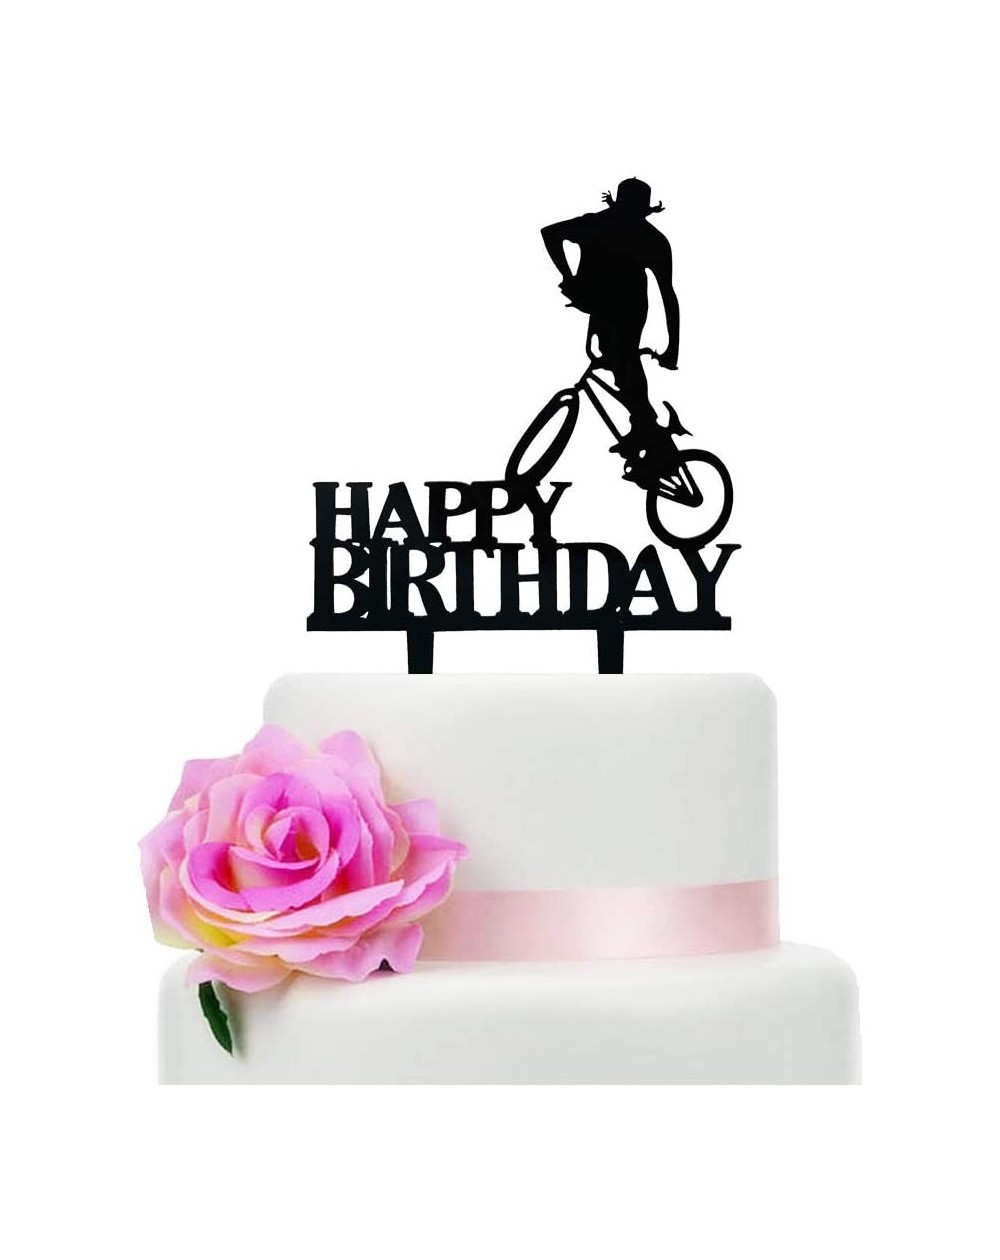 Cake & Cupcake Toppers Black Cycling Happy Birthday Cake Topper- Acrylic Happy Birthday Party Cake Decoration- Bicycle/Sports...